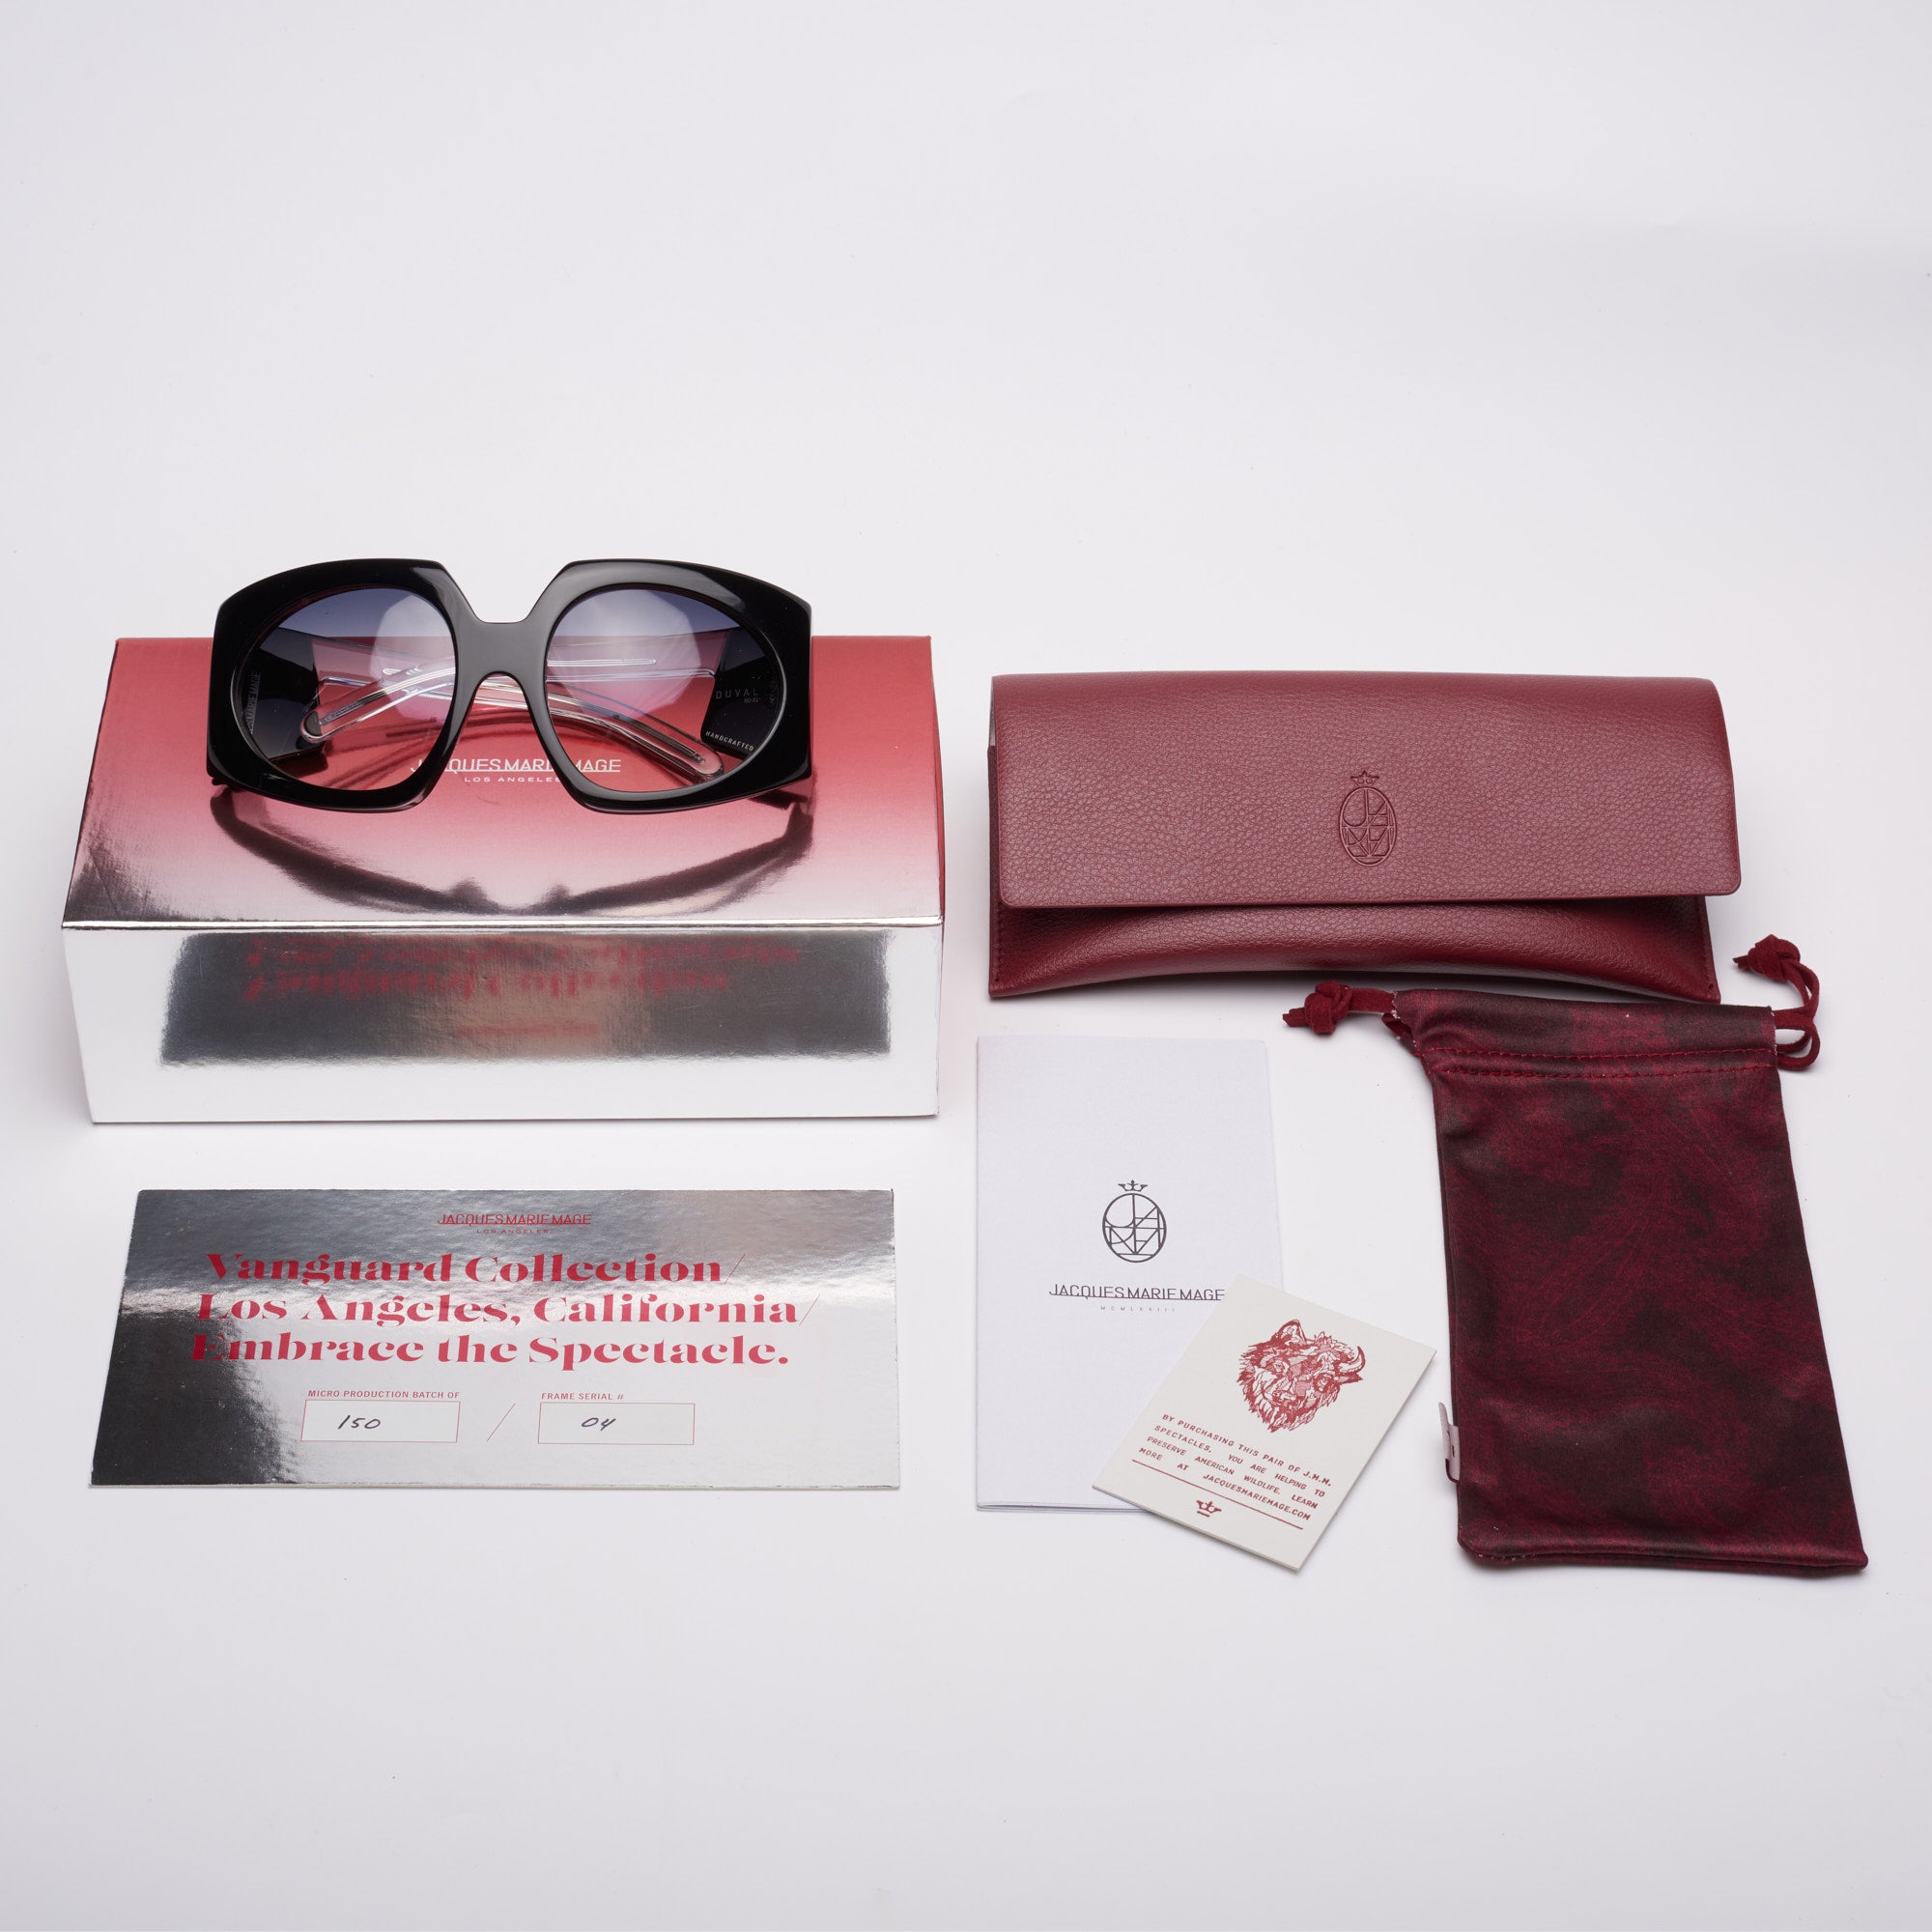 JACQUES MARIE MAGE "Duval" JMMDV-89 Limited Edition 04/150 Sunglasses NEW JACQUES MARIE MAGE